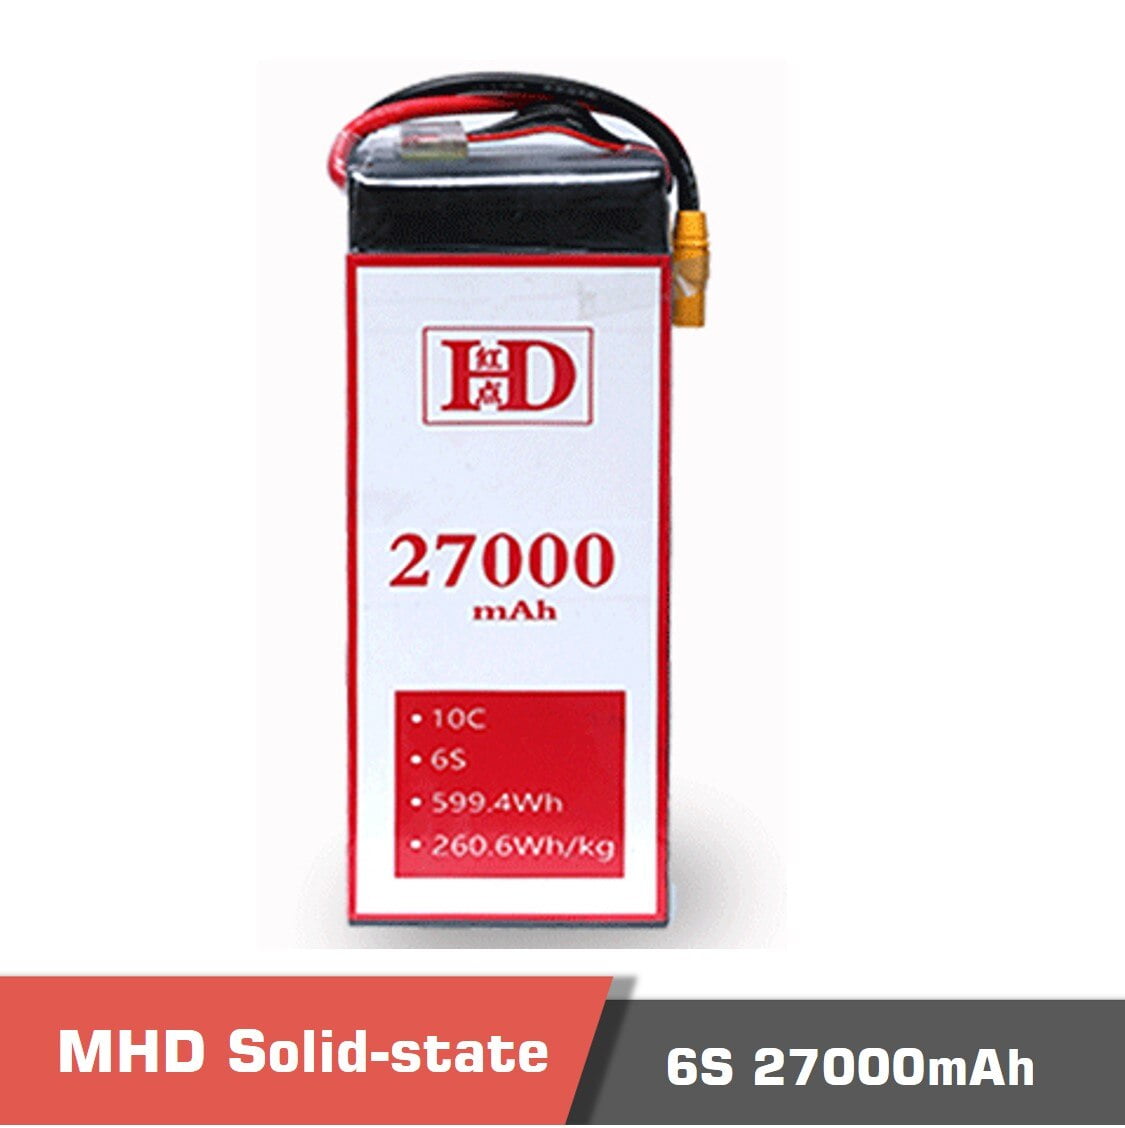 Mhd new technology solid-state li-ion battery motionew